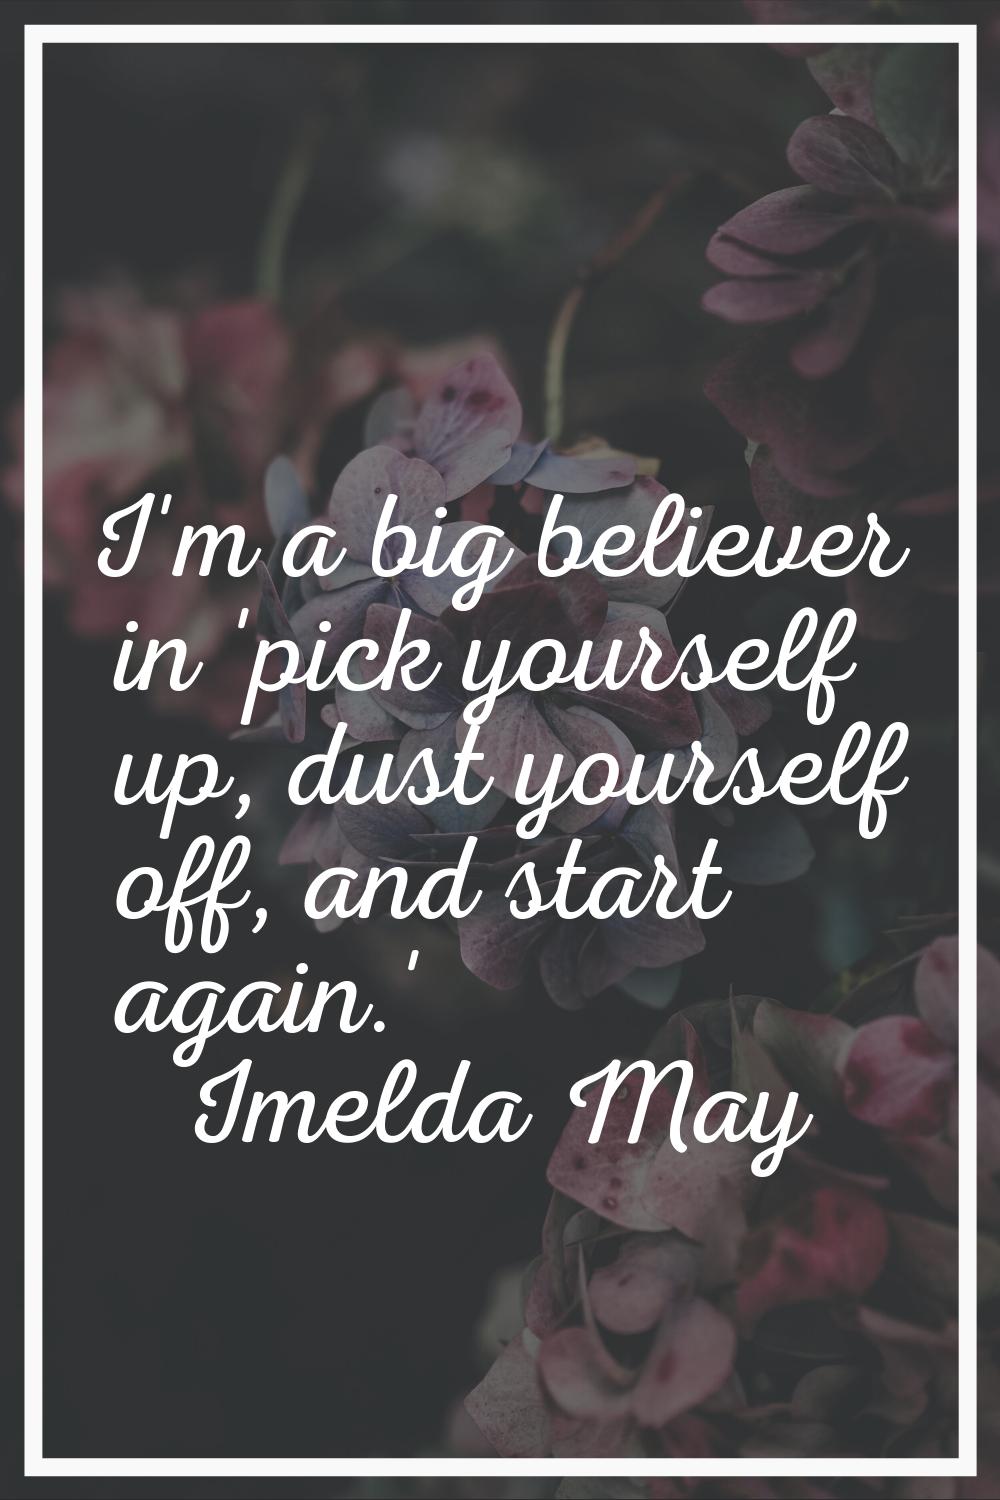 I'm a big believer in 'pick yourself up, dust yourself off, and start again.'